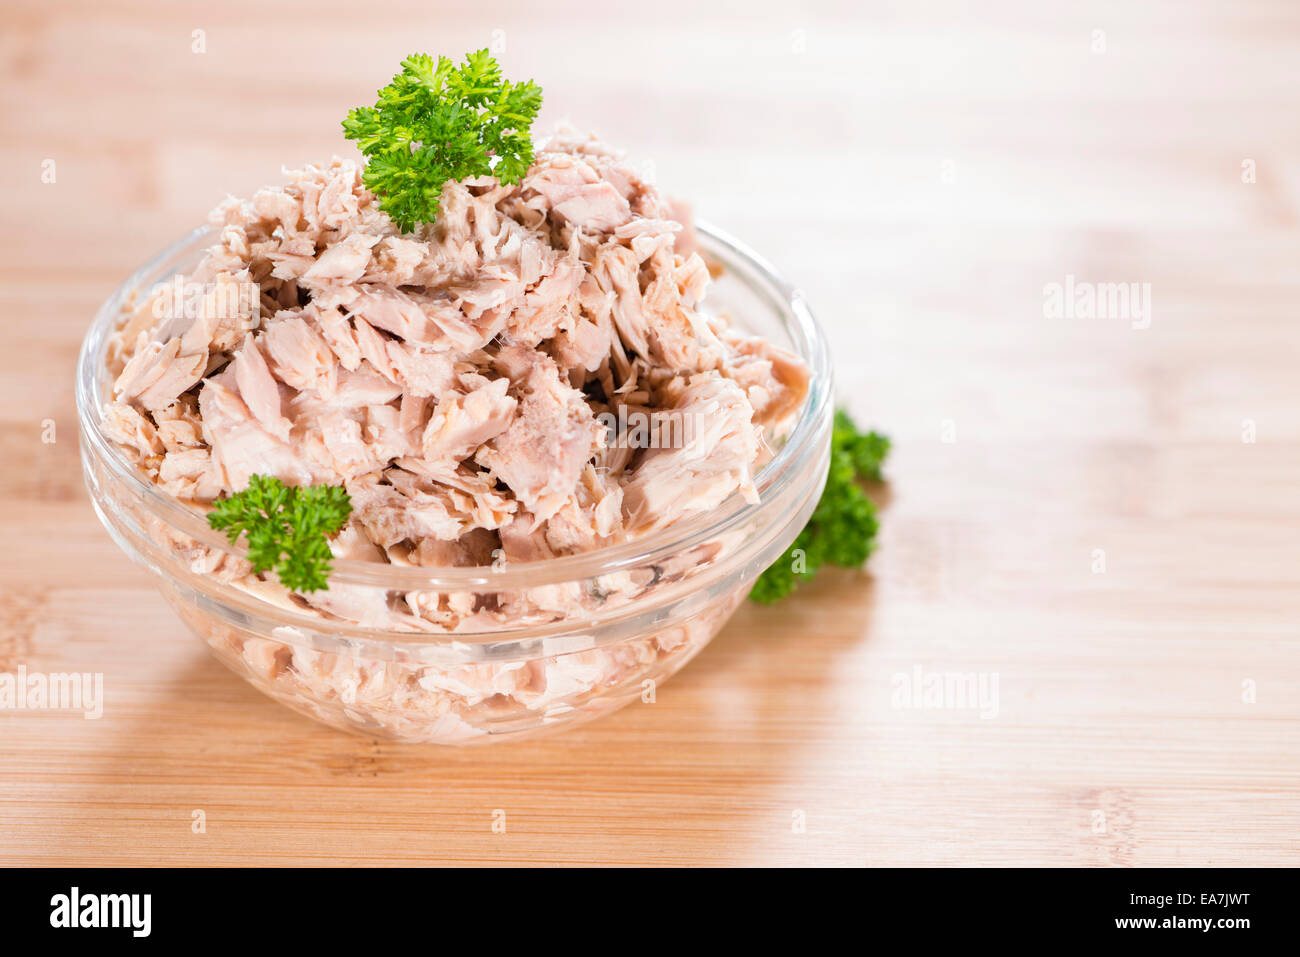 Portion of Tuna with fresh parsly on wooden background Stock Photo